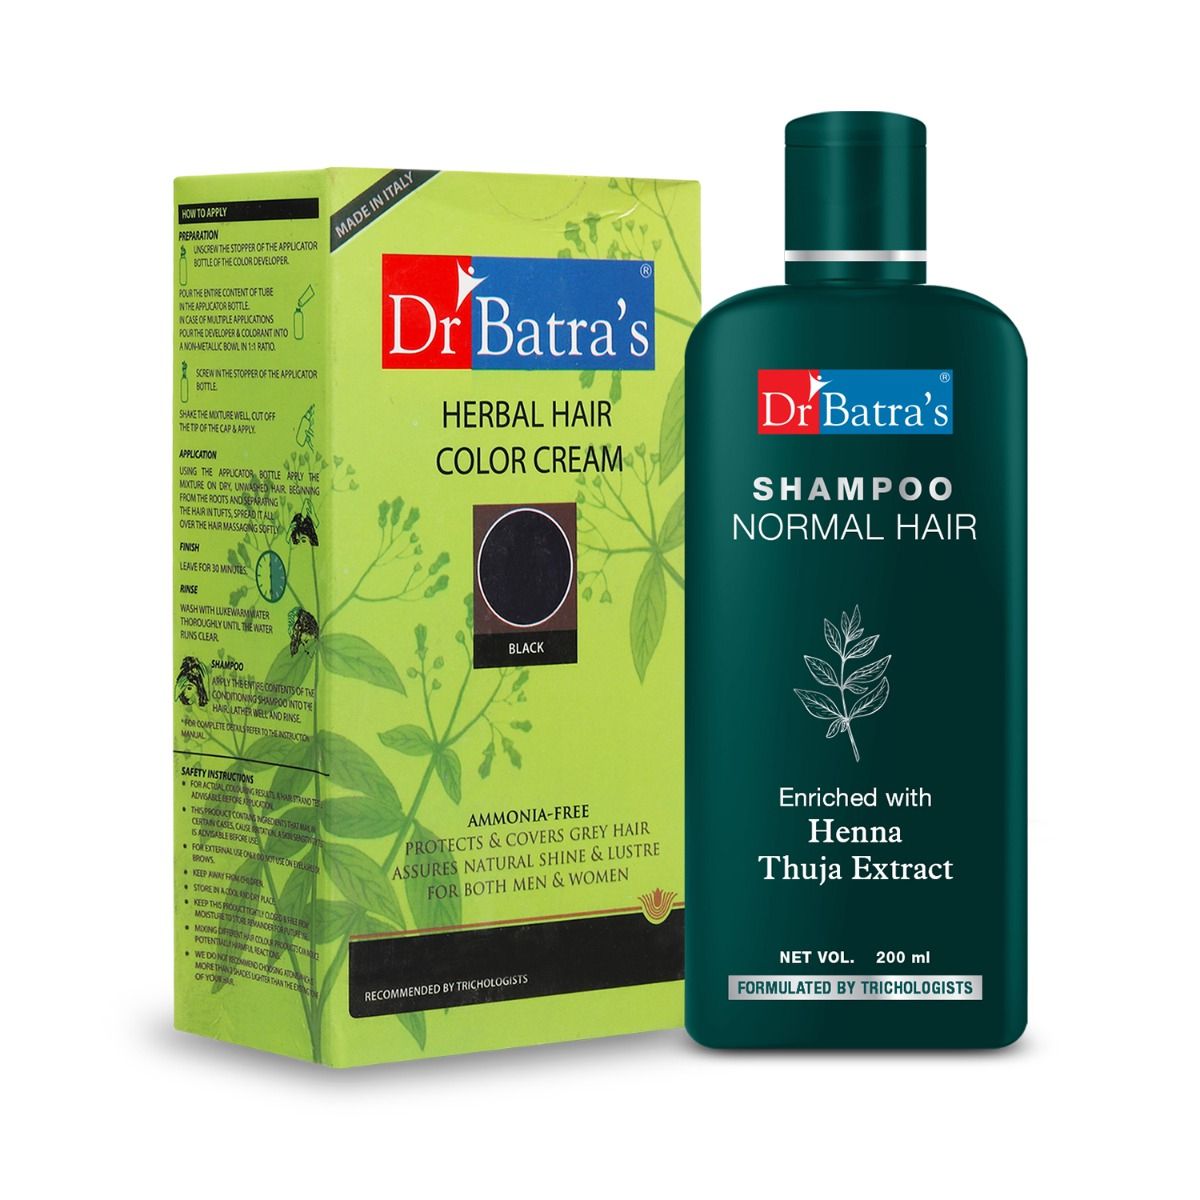     			Dr Batra's Herbal Hair Color Cream 130 G and Normal Shampoo 200 ml (Pack of 2 Men and Women)